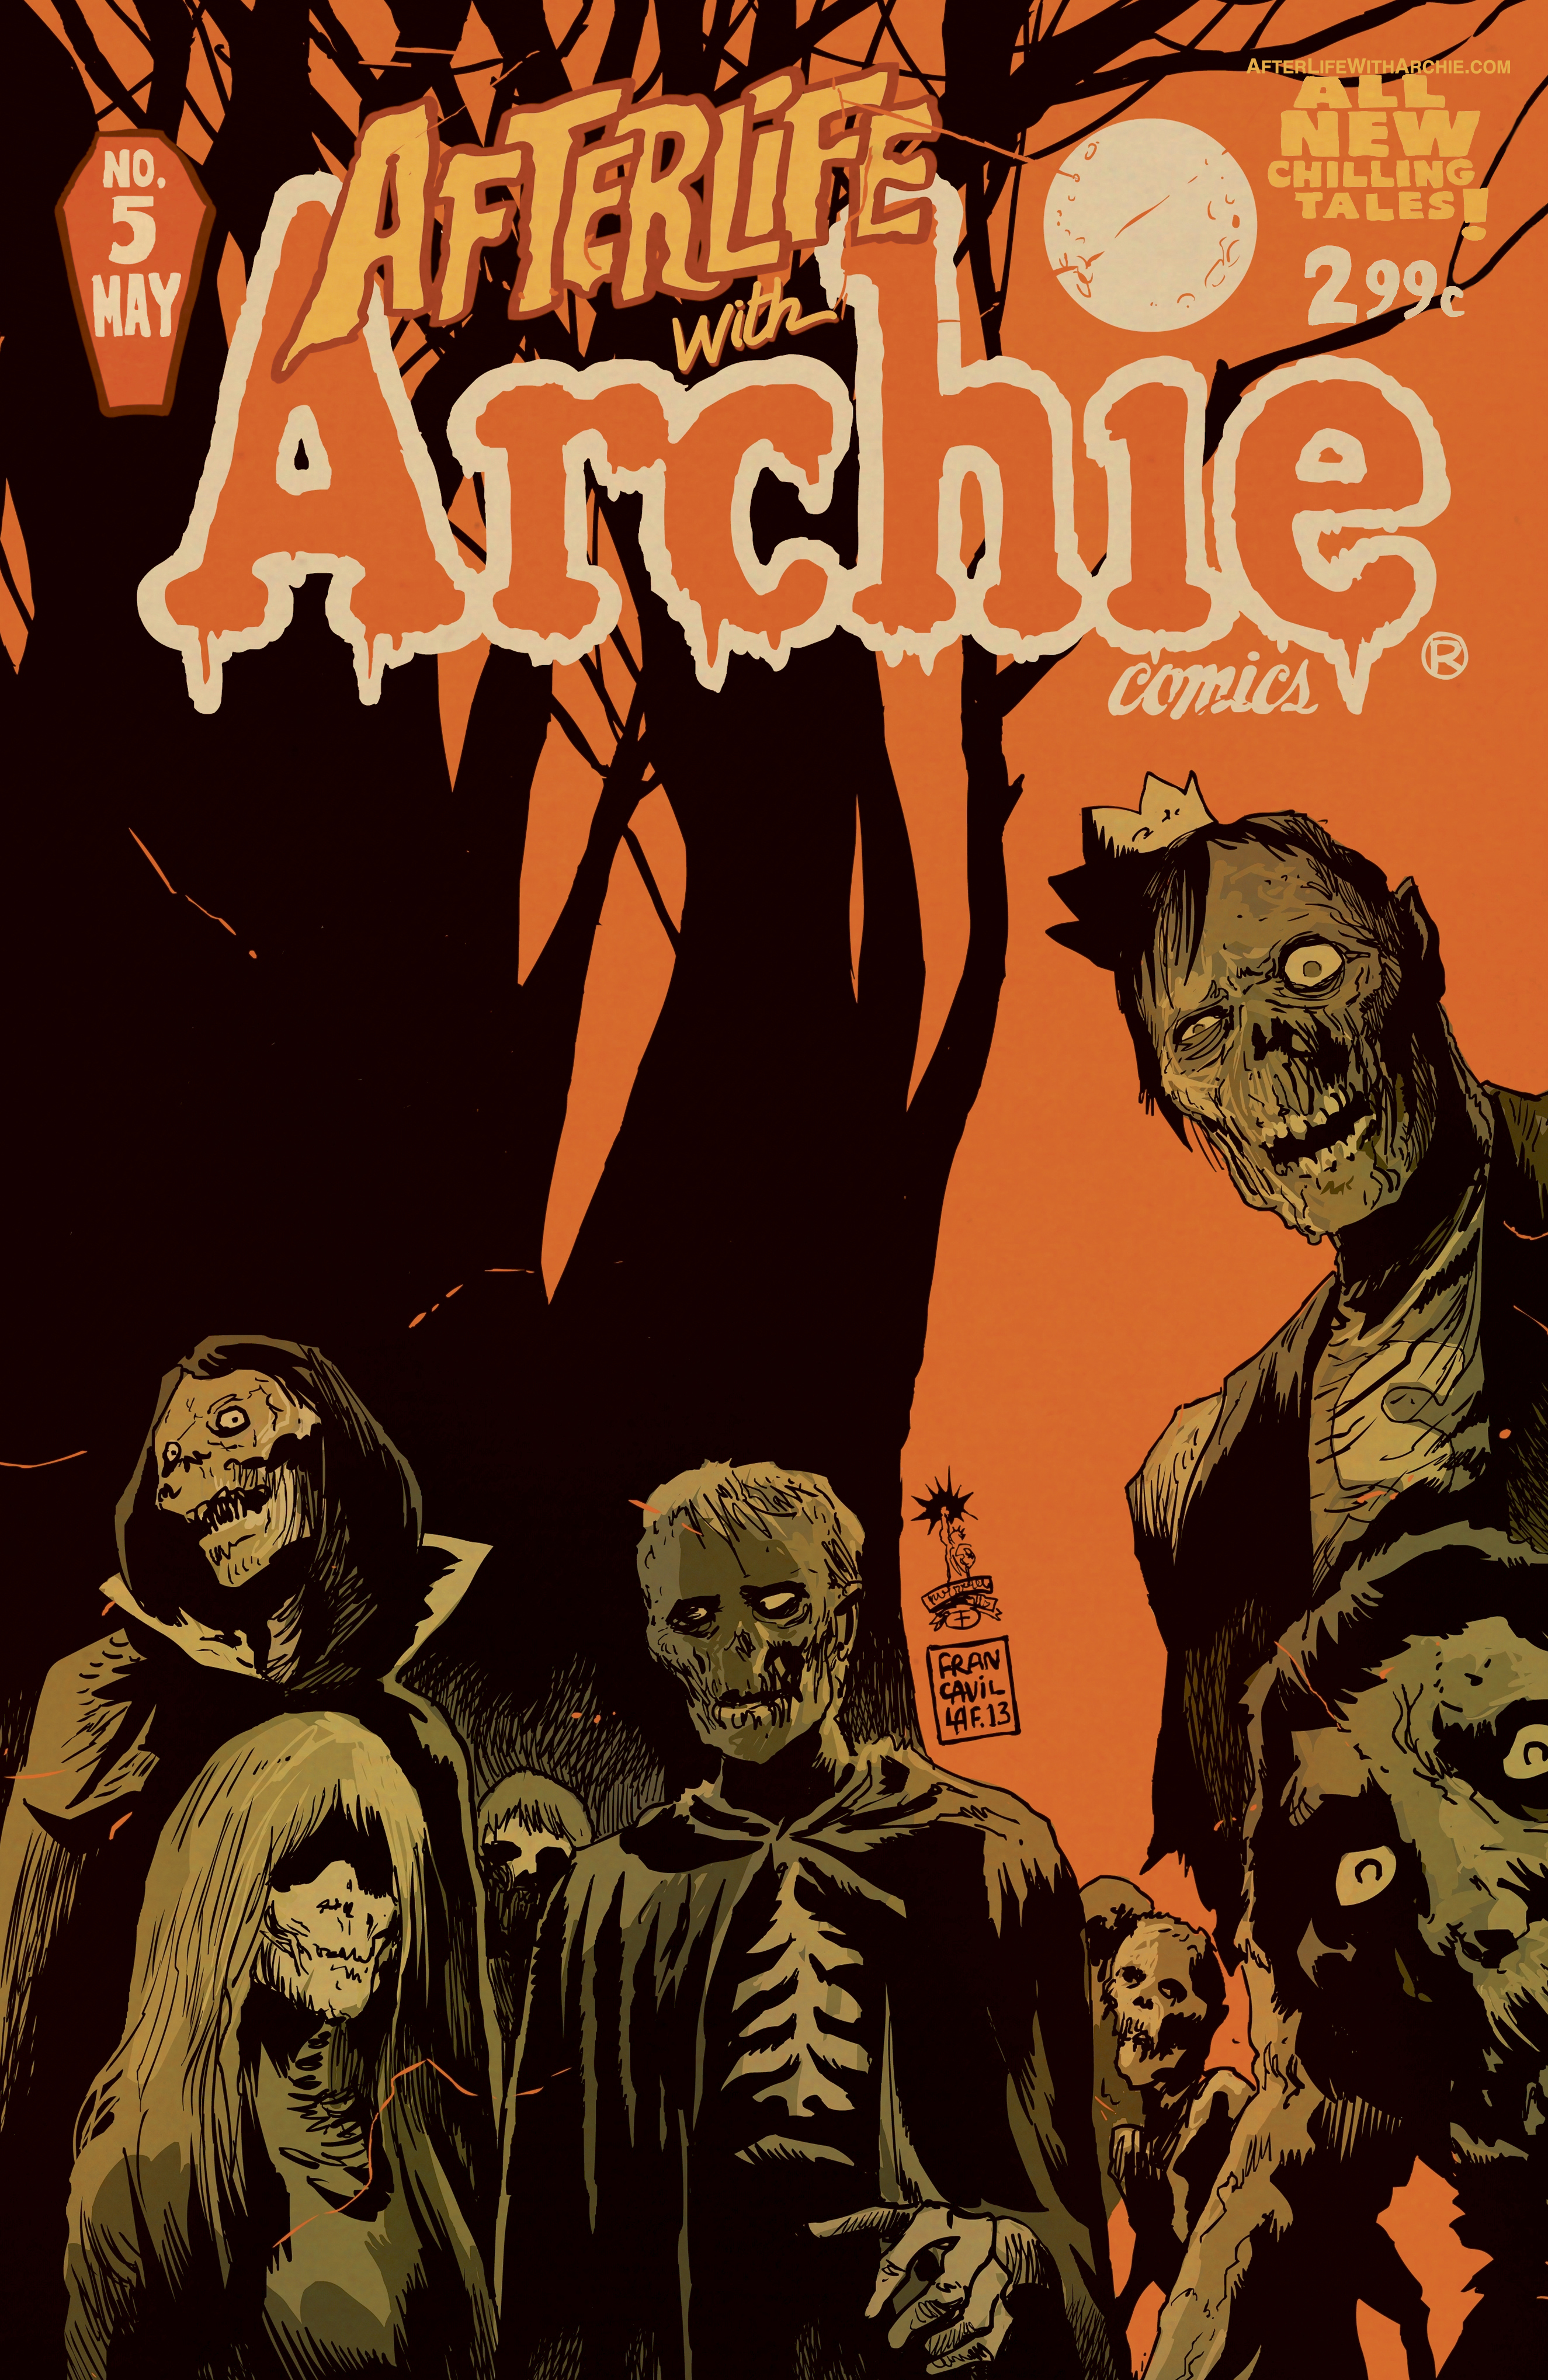 Afterlife With Archie #3